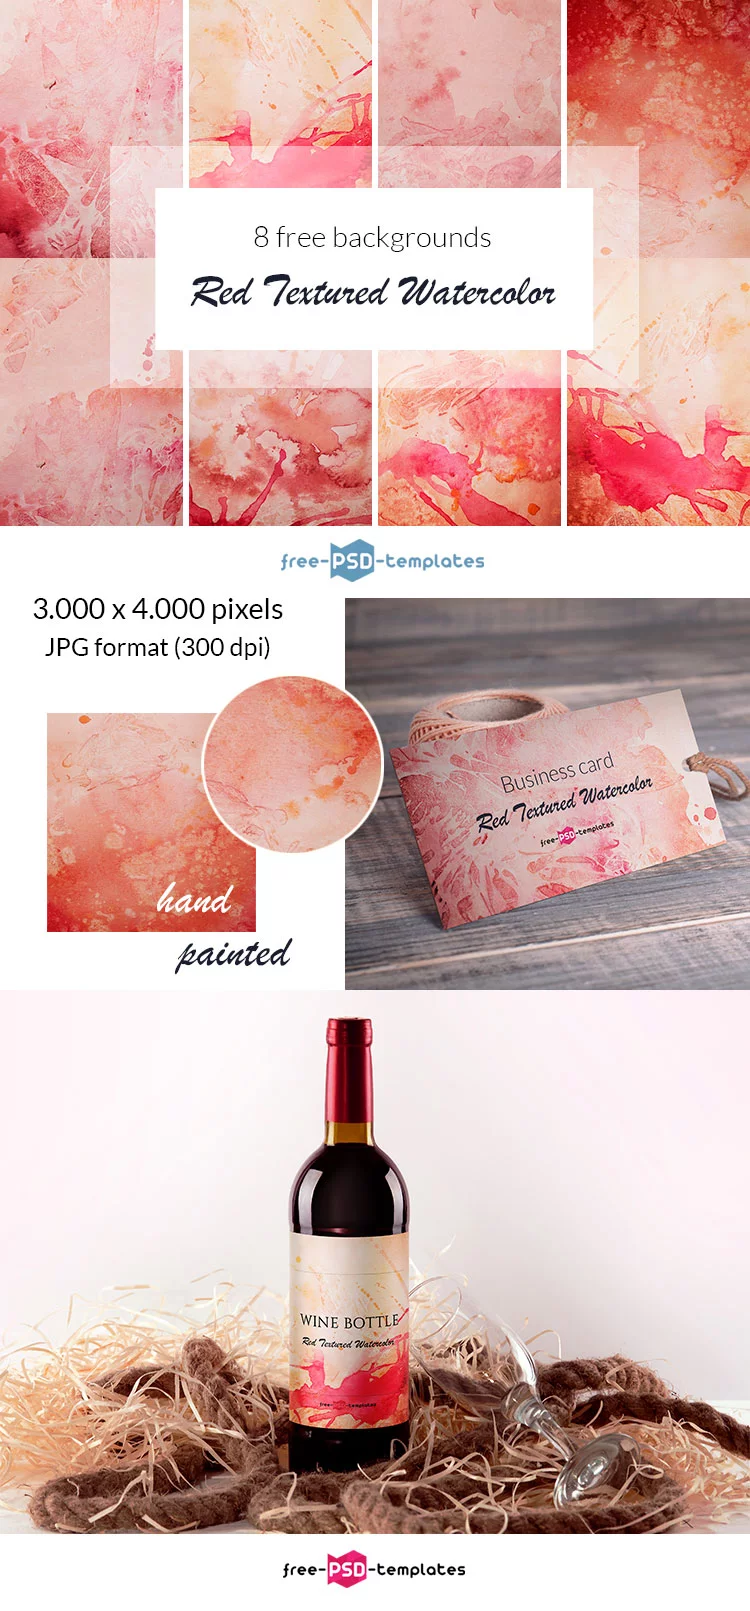 Free Red Textured Watercolor